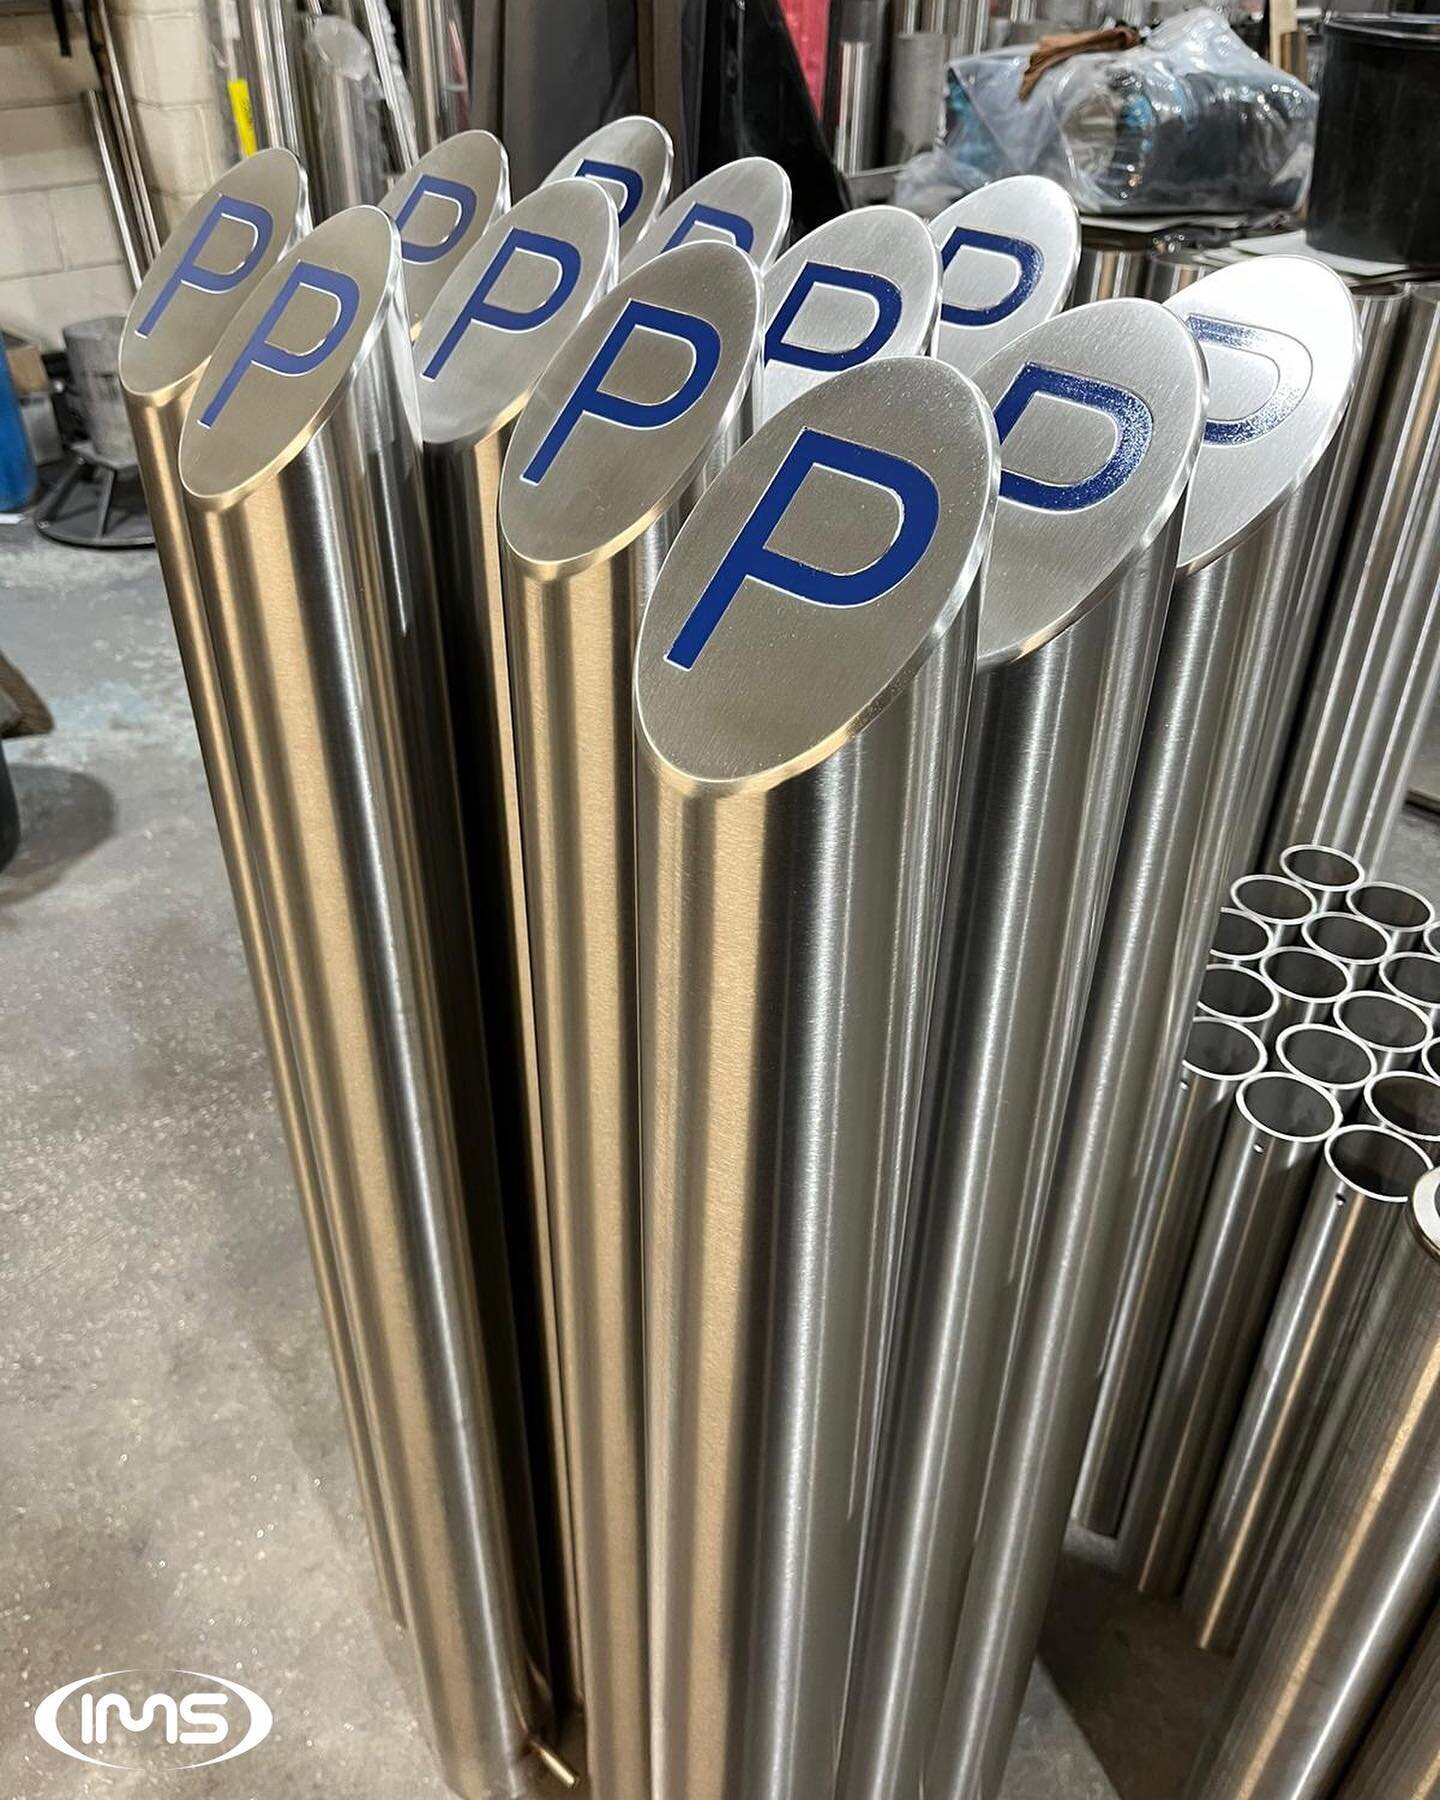 &ldquo;Can I have a &lsquo;P&rsquo; please Bob?&rdquo; 

Stainless steel painted bollards going through the shop this morning 🅿️👍

#stainlesssteel #tradecustomer #bollard